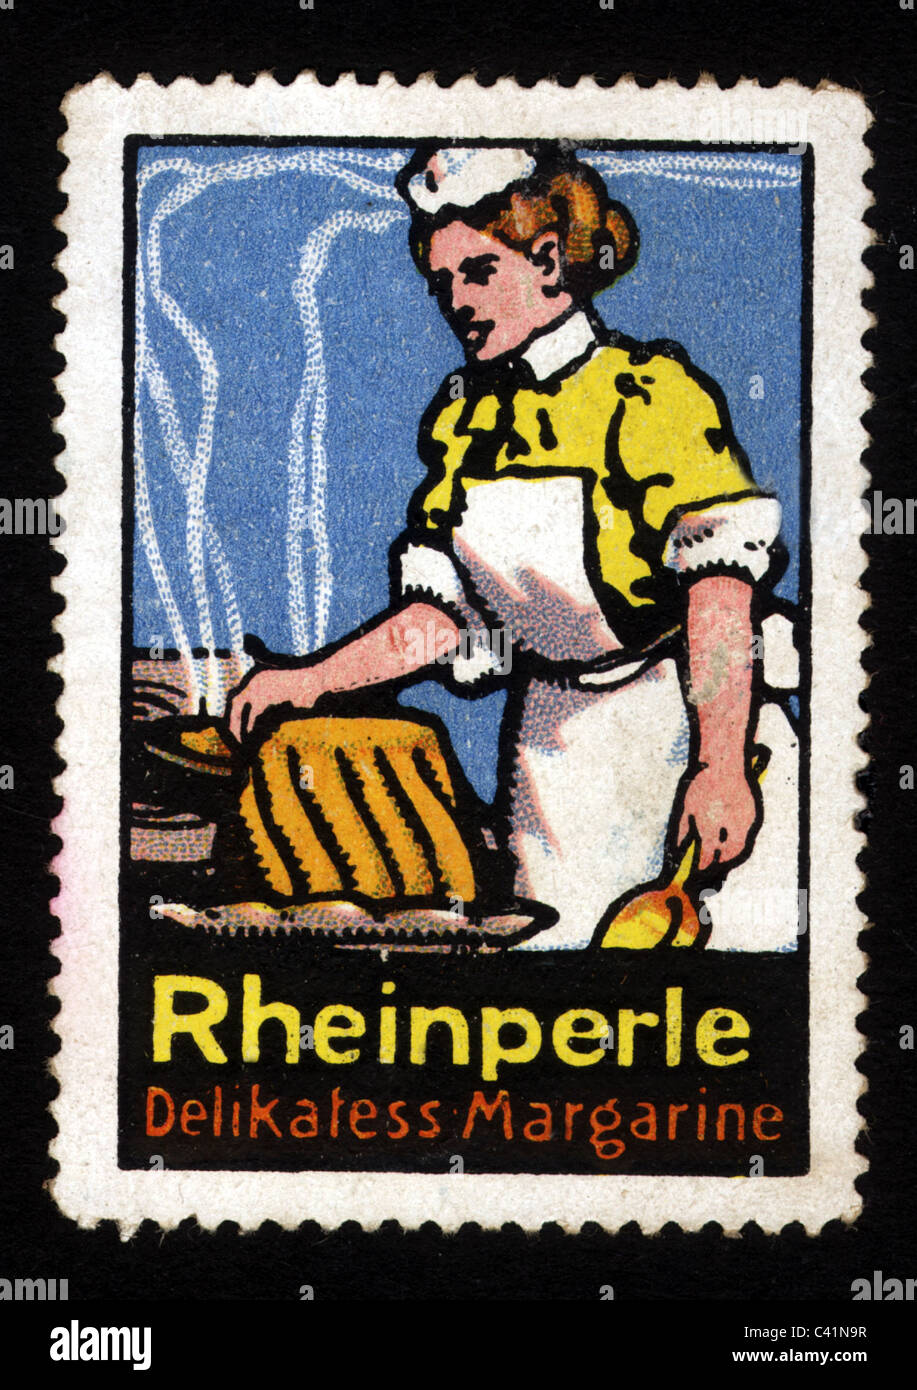 advertising, food, Rheinperle, margarine, poster stamp, circa 1910, Additional-Rights-Clearences-Not Available Stock Photo